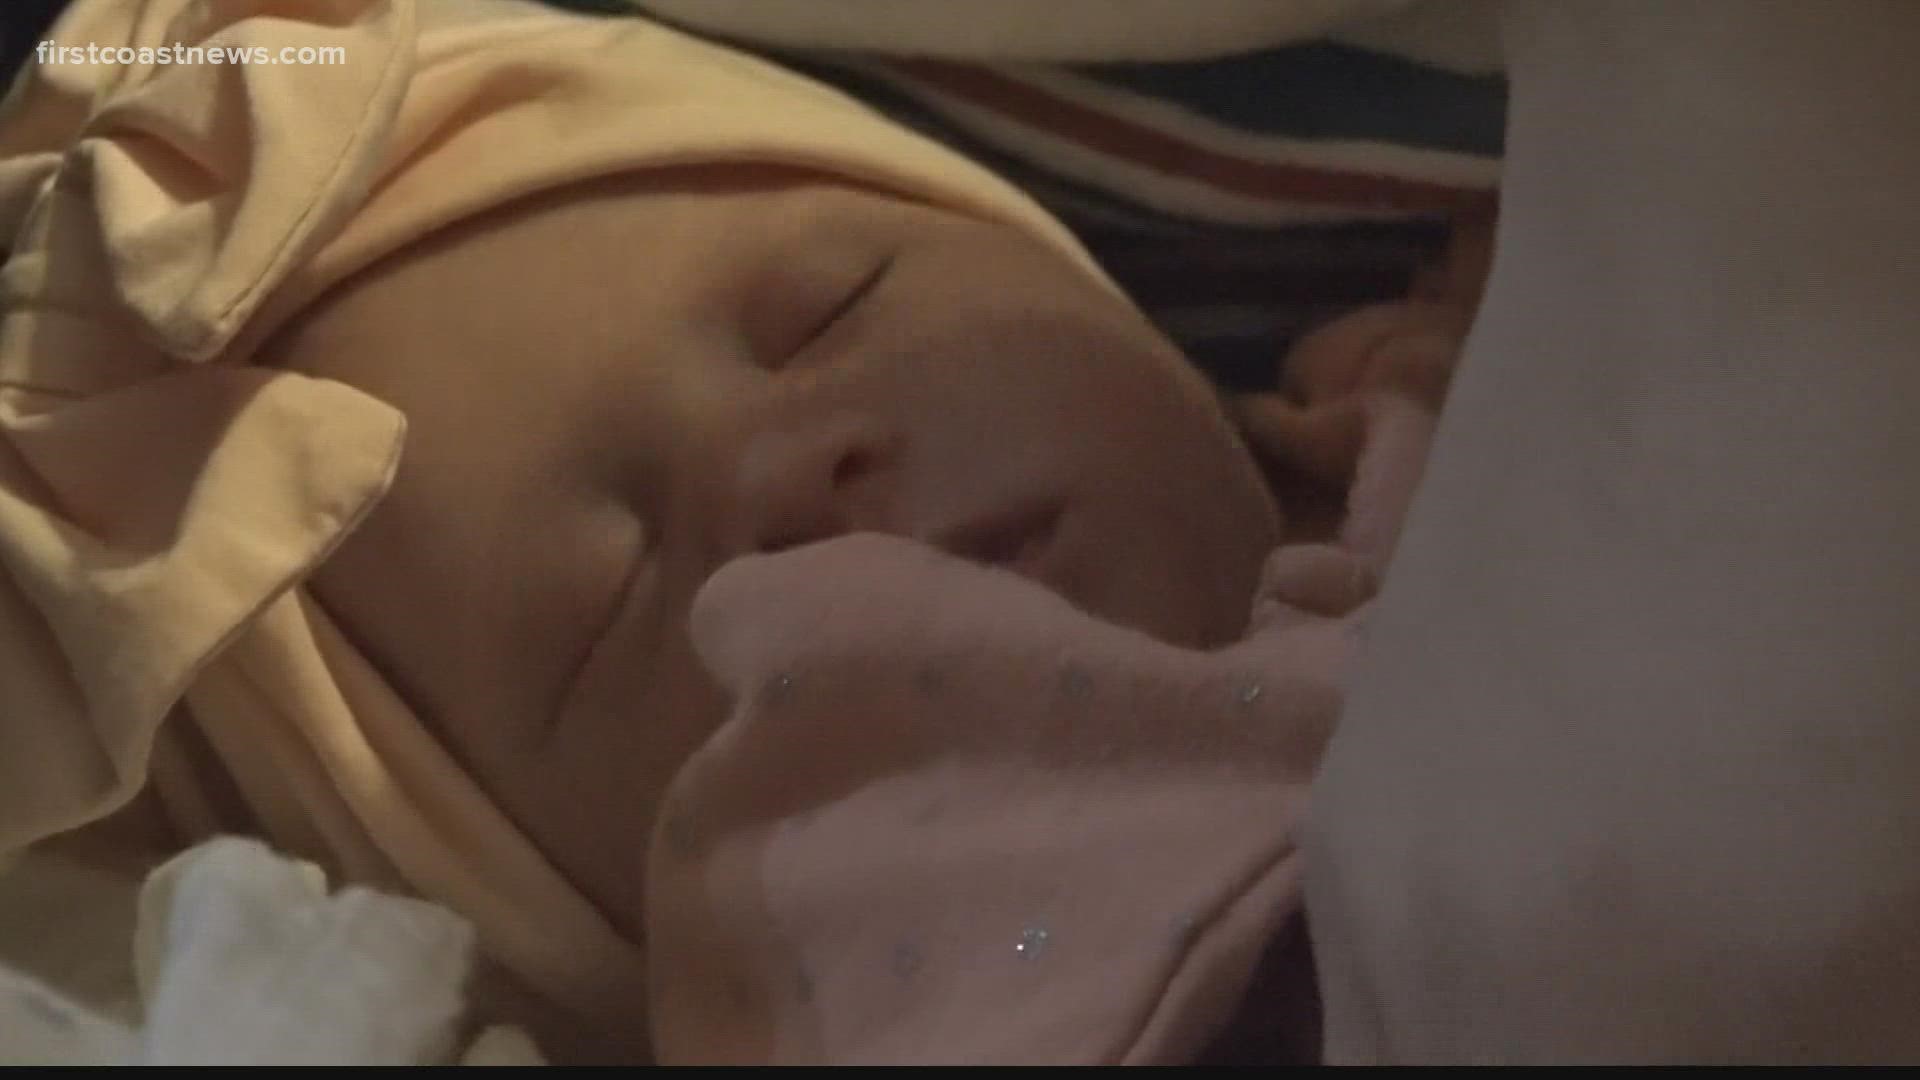 Bethany Price was scheduled for a C-section on Dec. 28. Her unborn daughter had other plans.